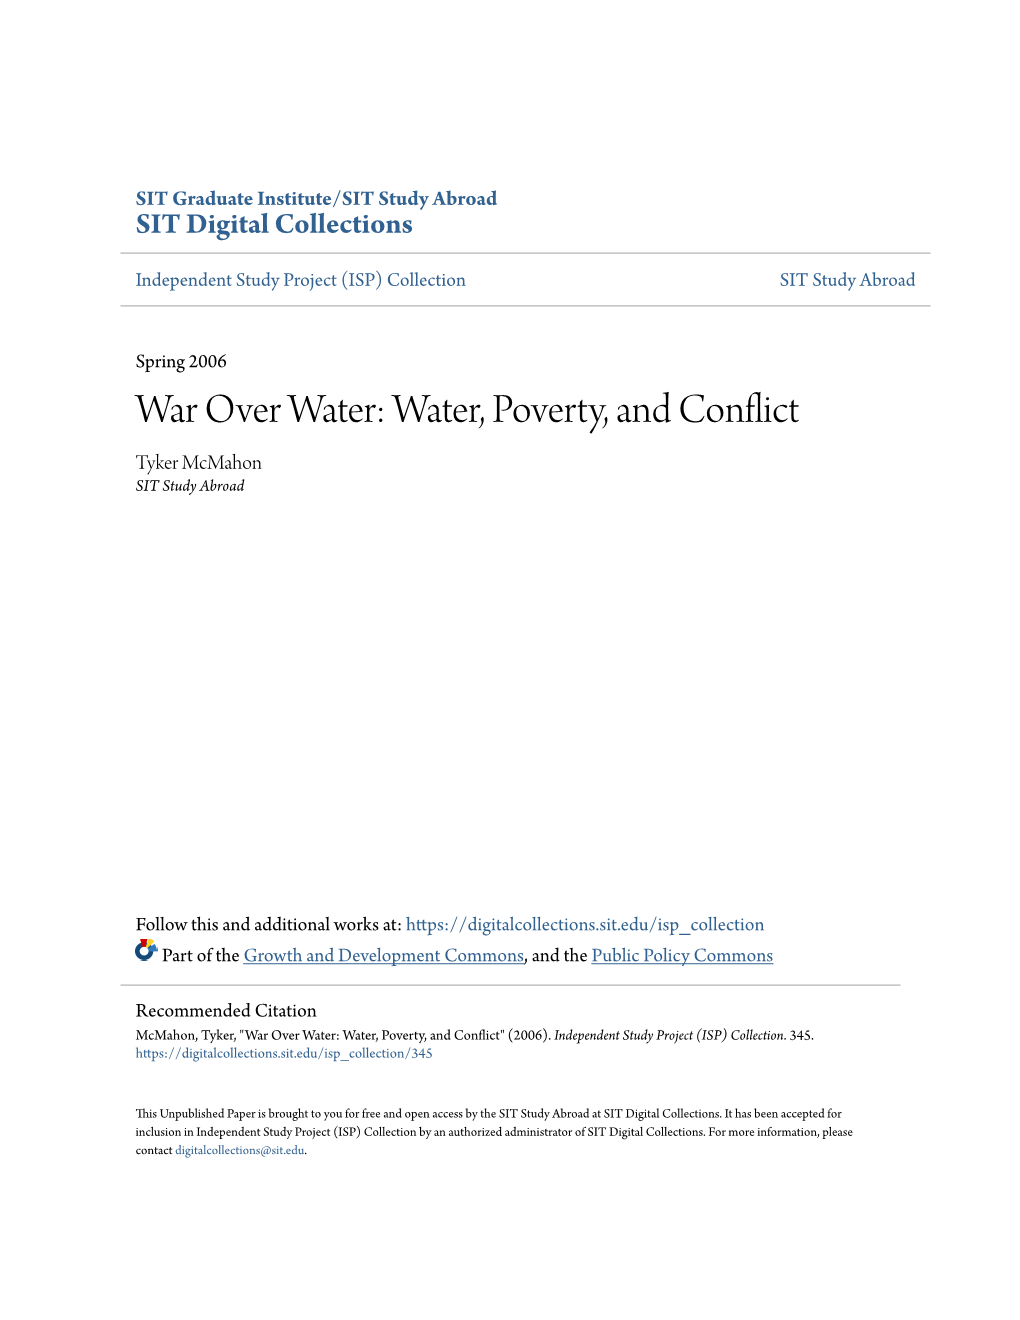 War Over Water: Water, Poverty, and Conflict Tyker Mcmahon SIT Study Abroad